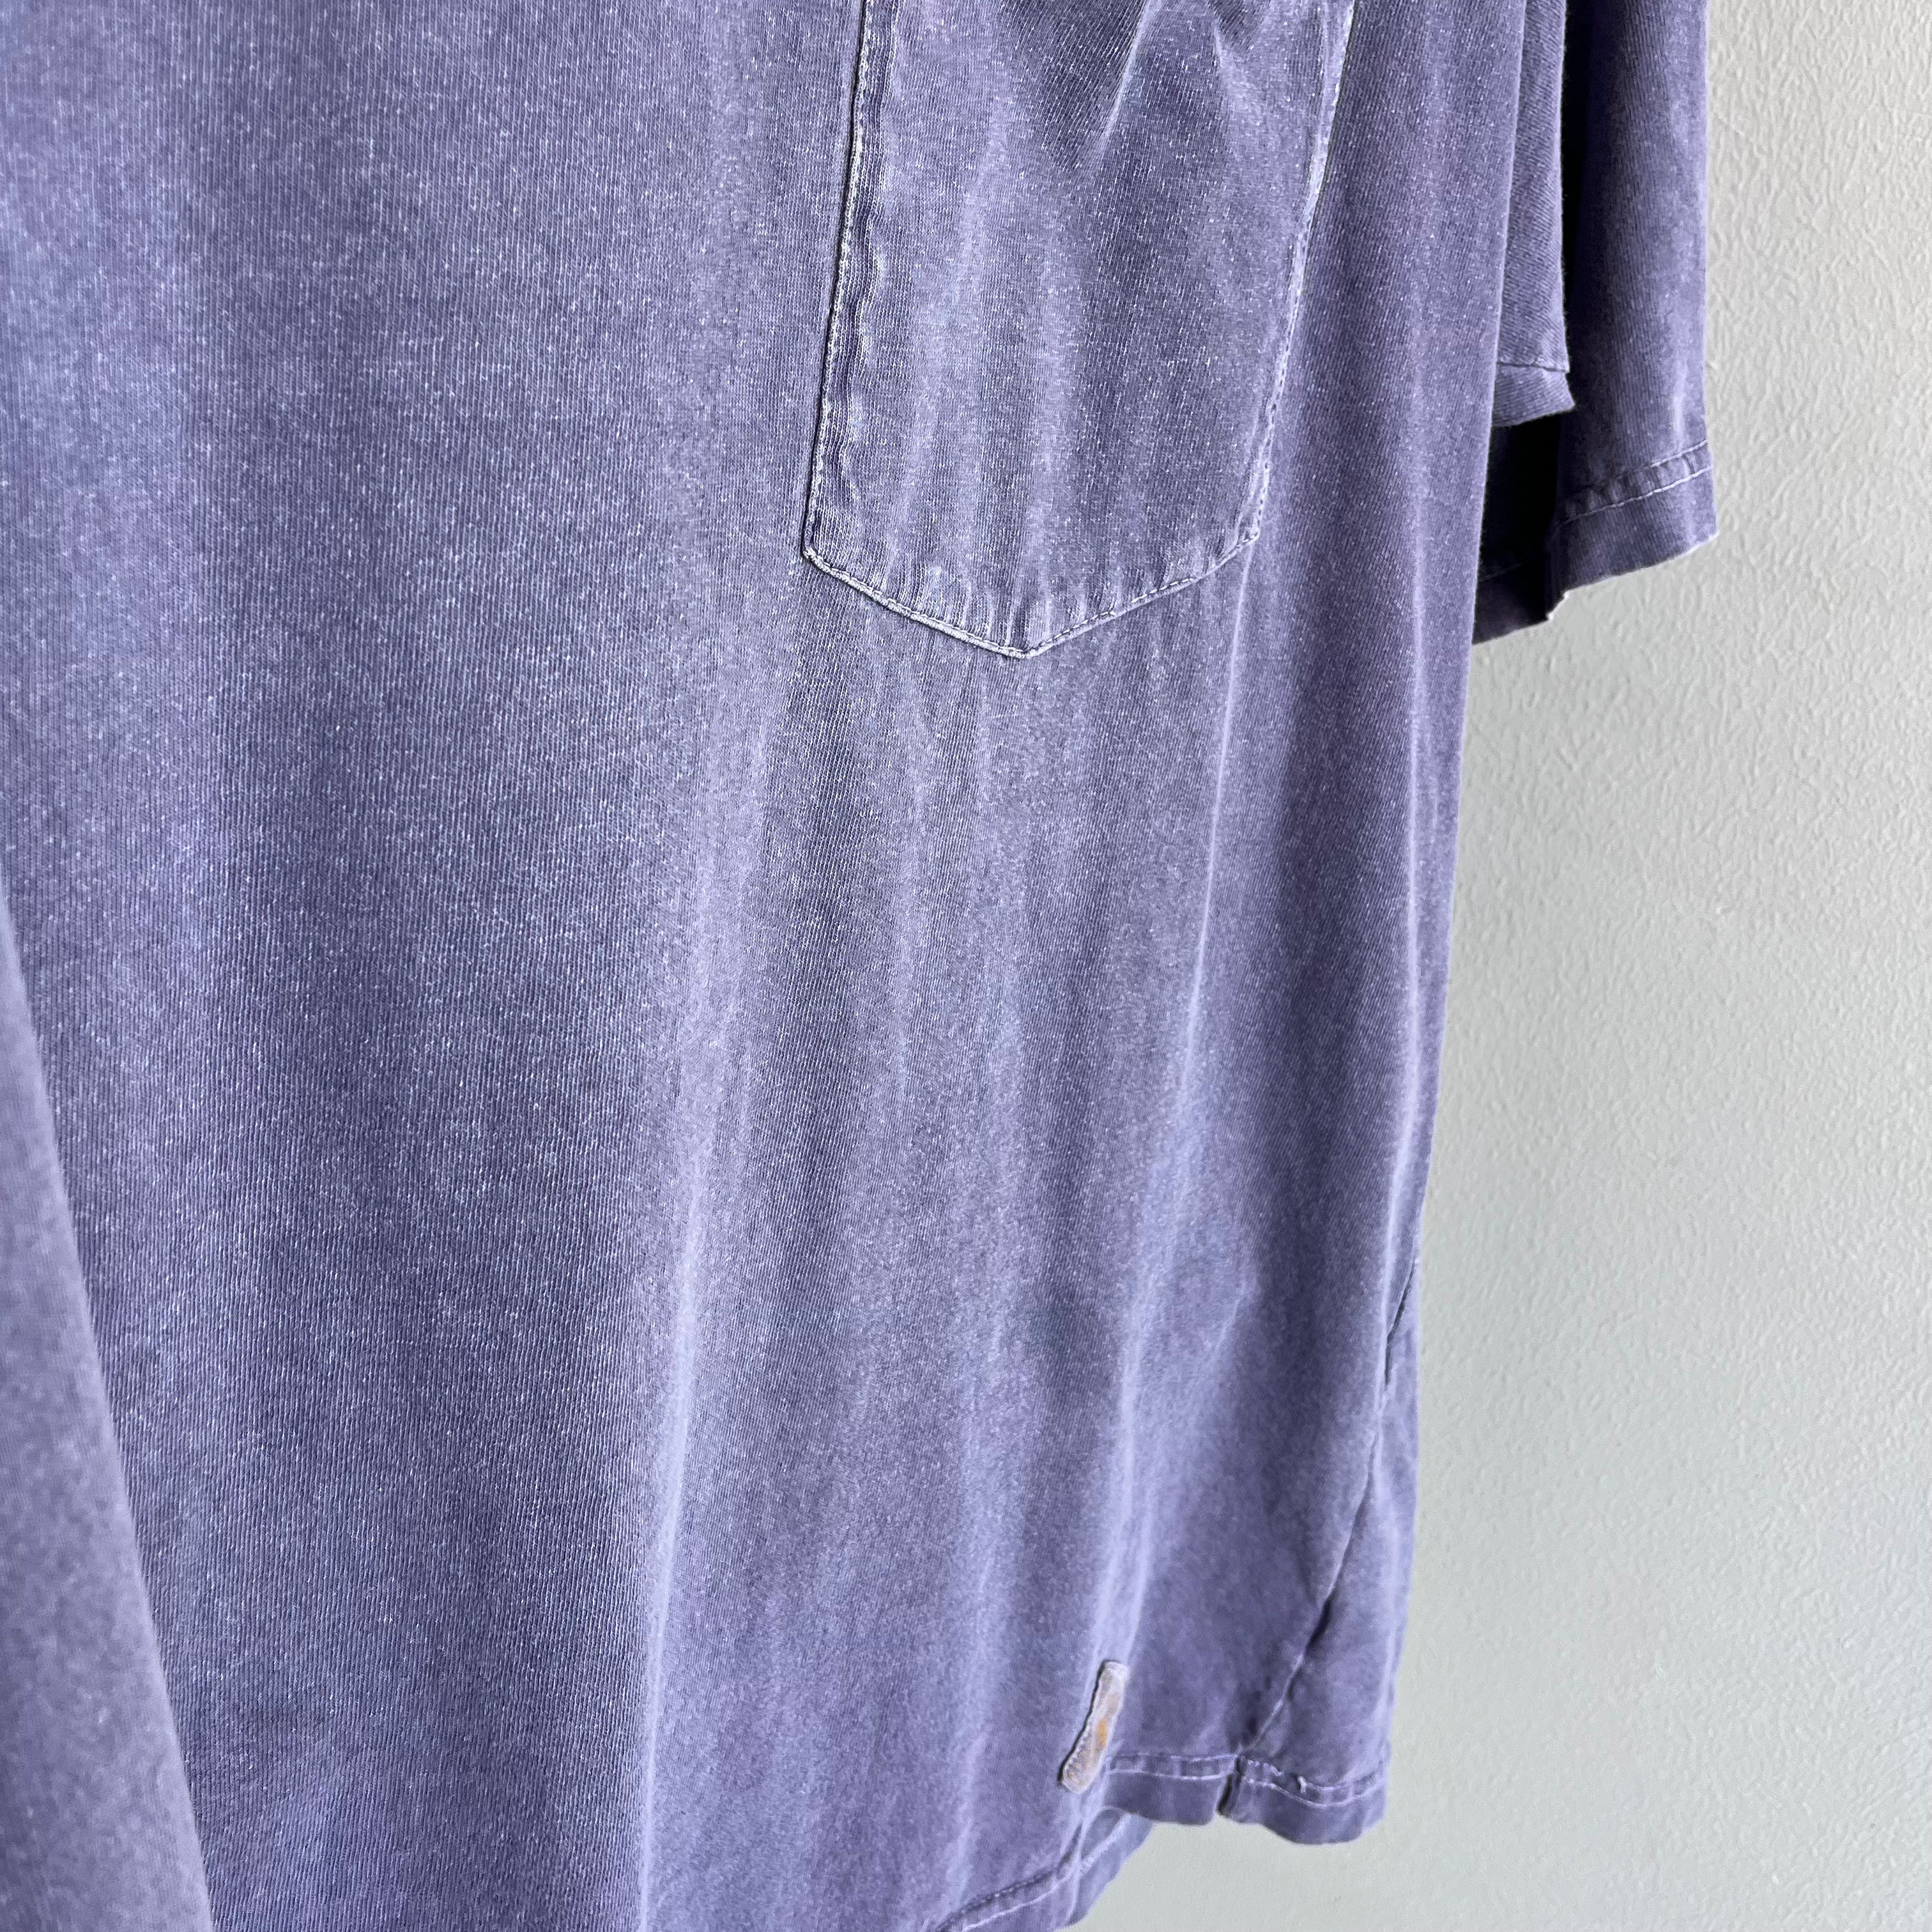 1990s Gramicci Faded and Wonderful Relaxed Fit Pocket T-Shirt